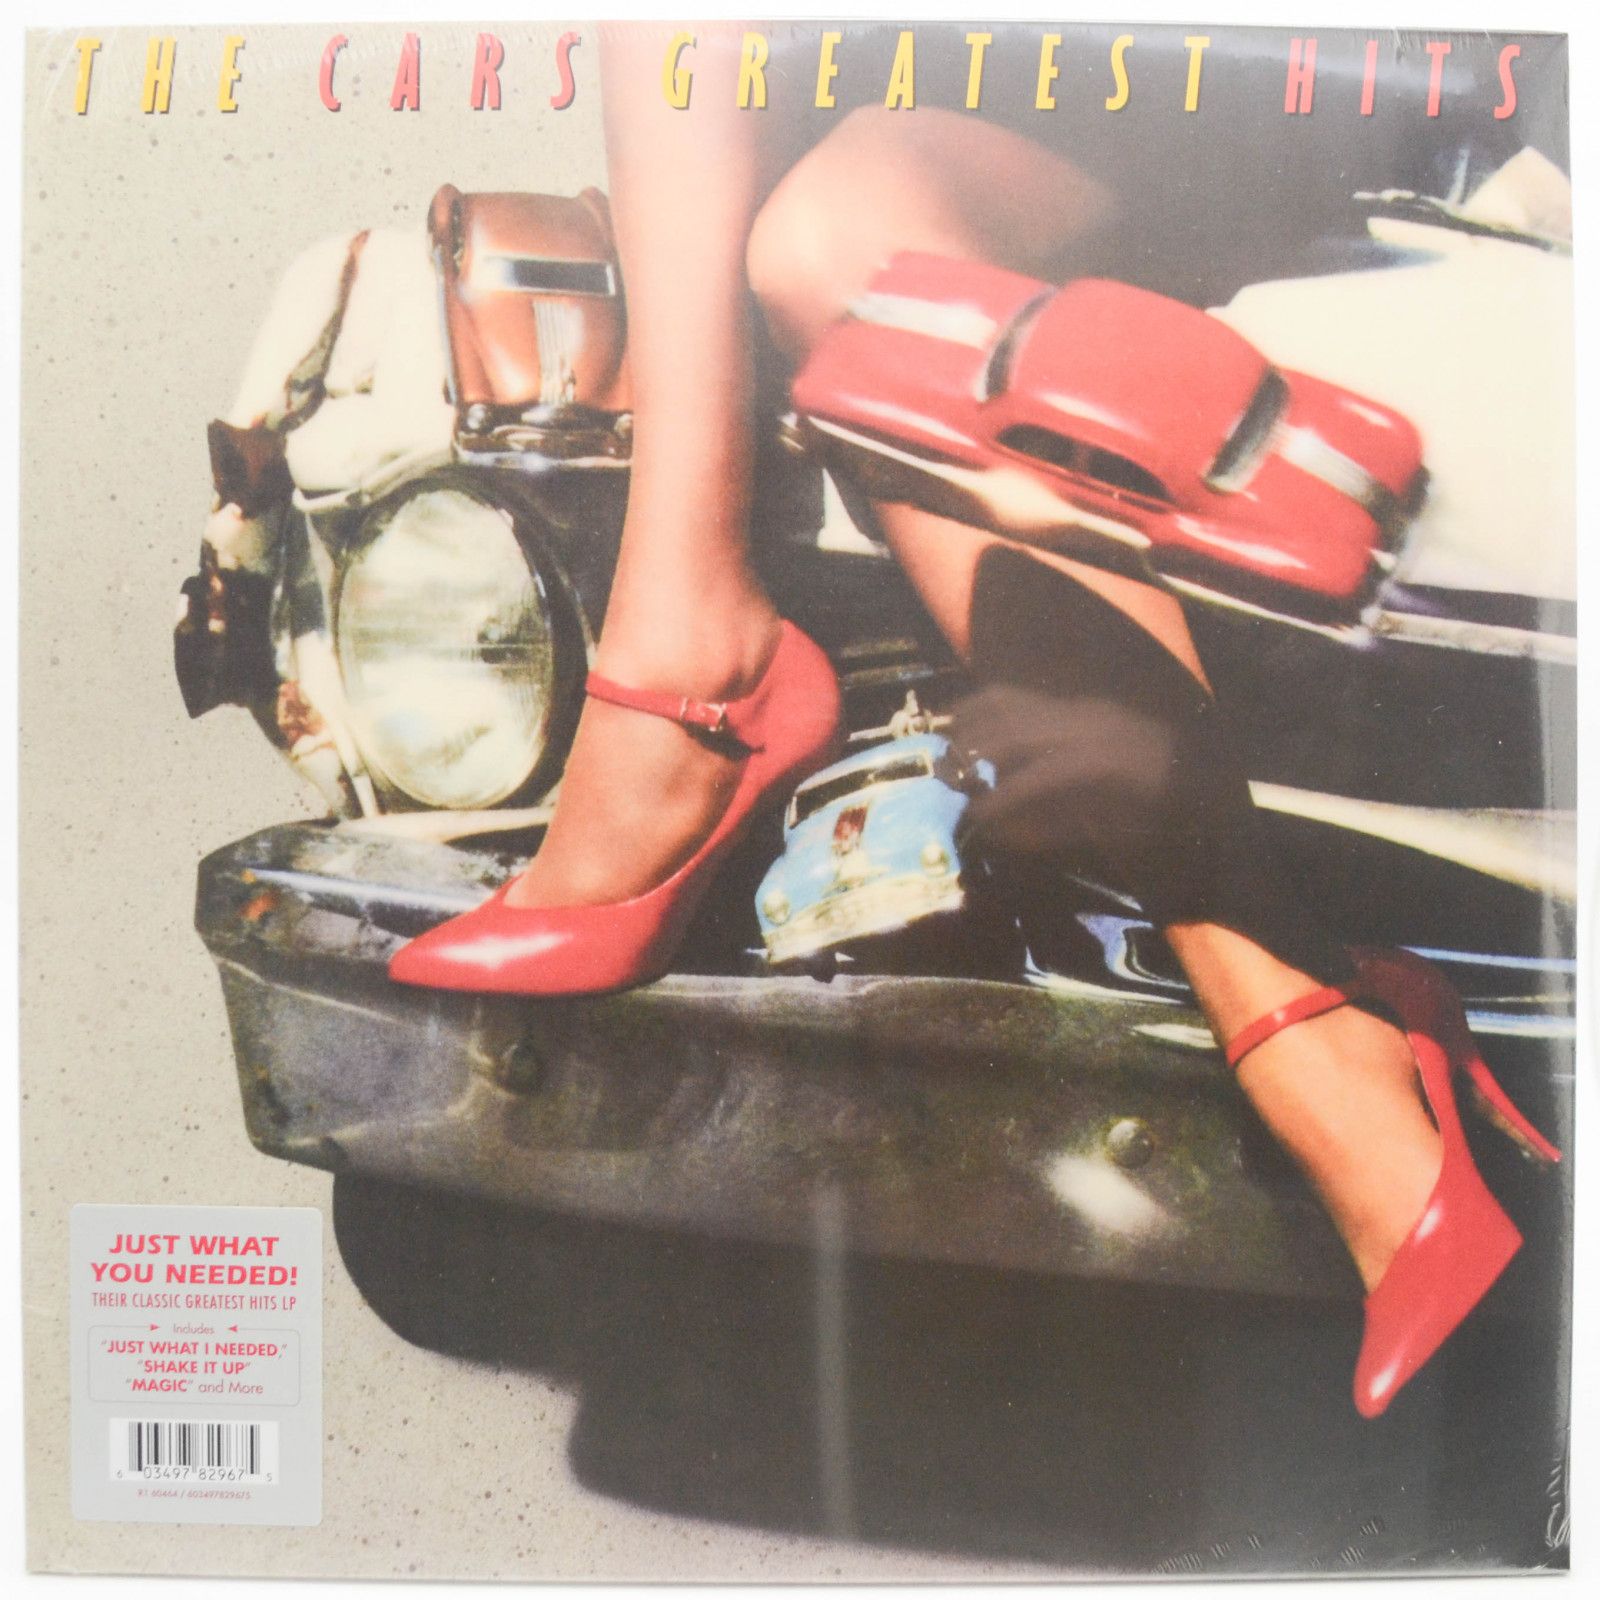 Cars — The Cars Greatest Hits (USA), 1985